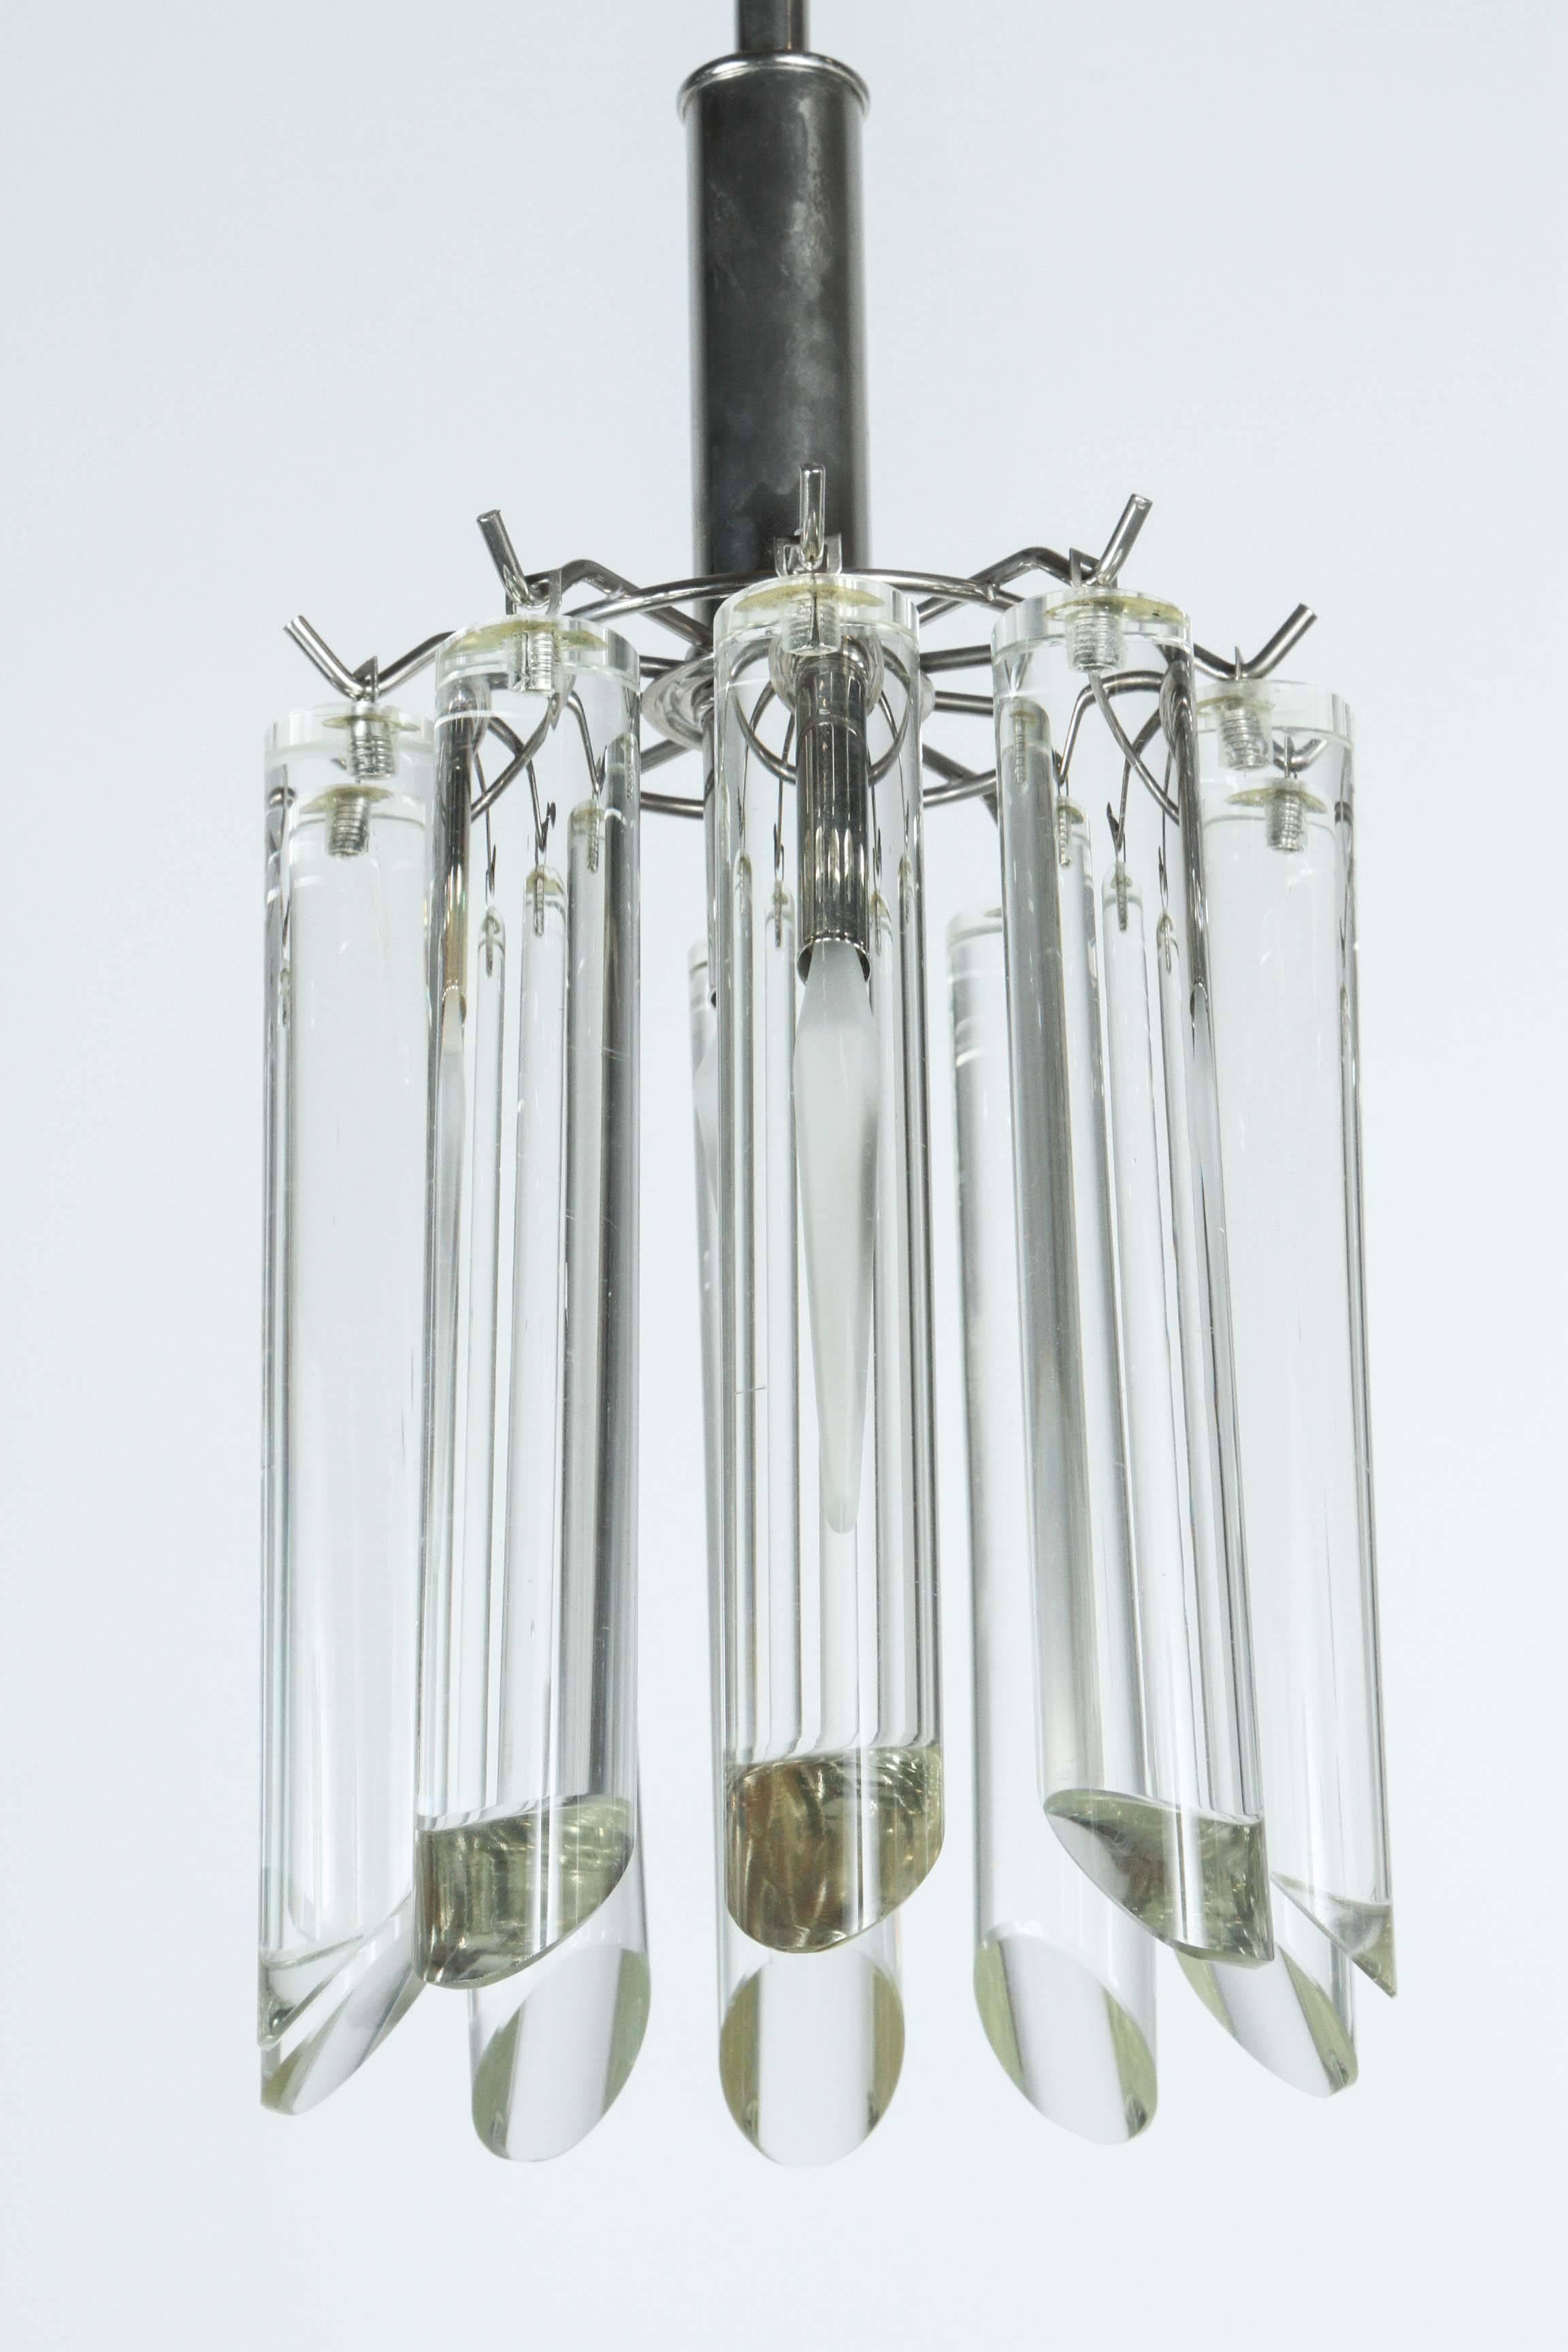 Petit cylindrical pendant light.
The polished chrome armature supports the cylindrical glass elements which are 
illuminated by a single light source.
The fixture comes complete with a matching chrome ceiling canopy.